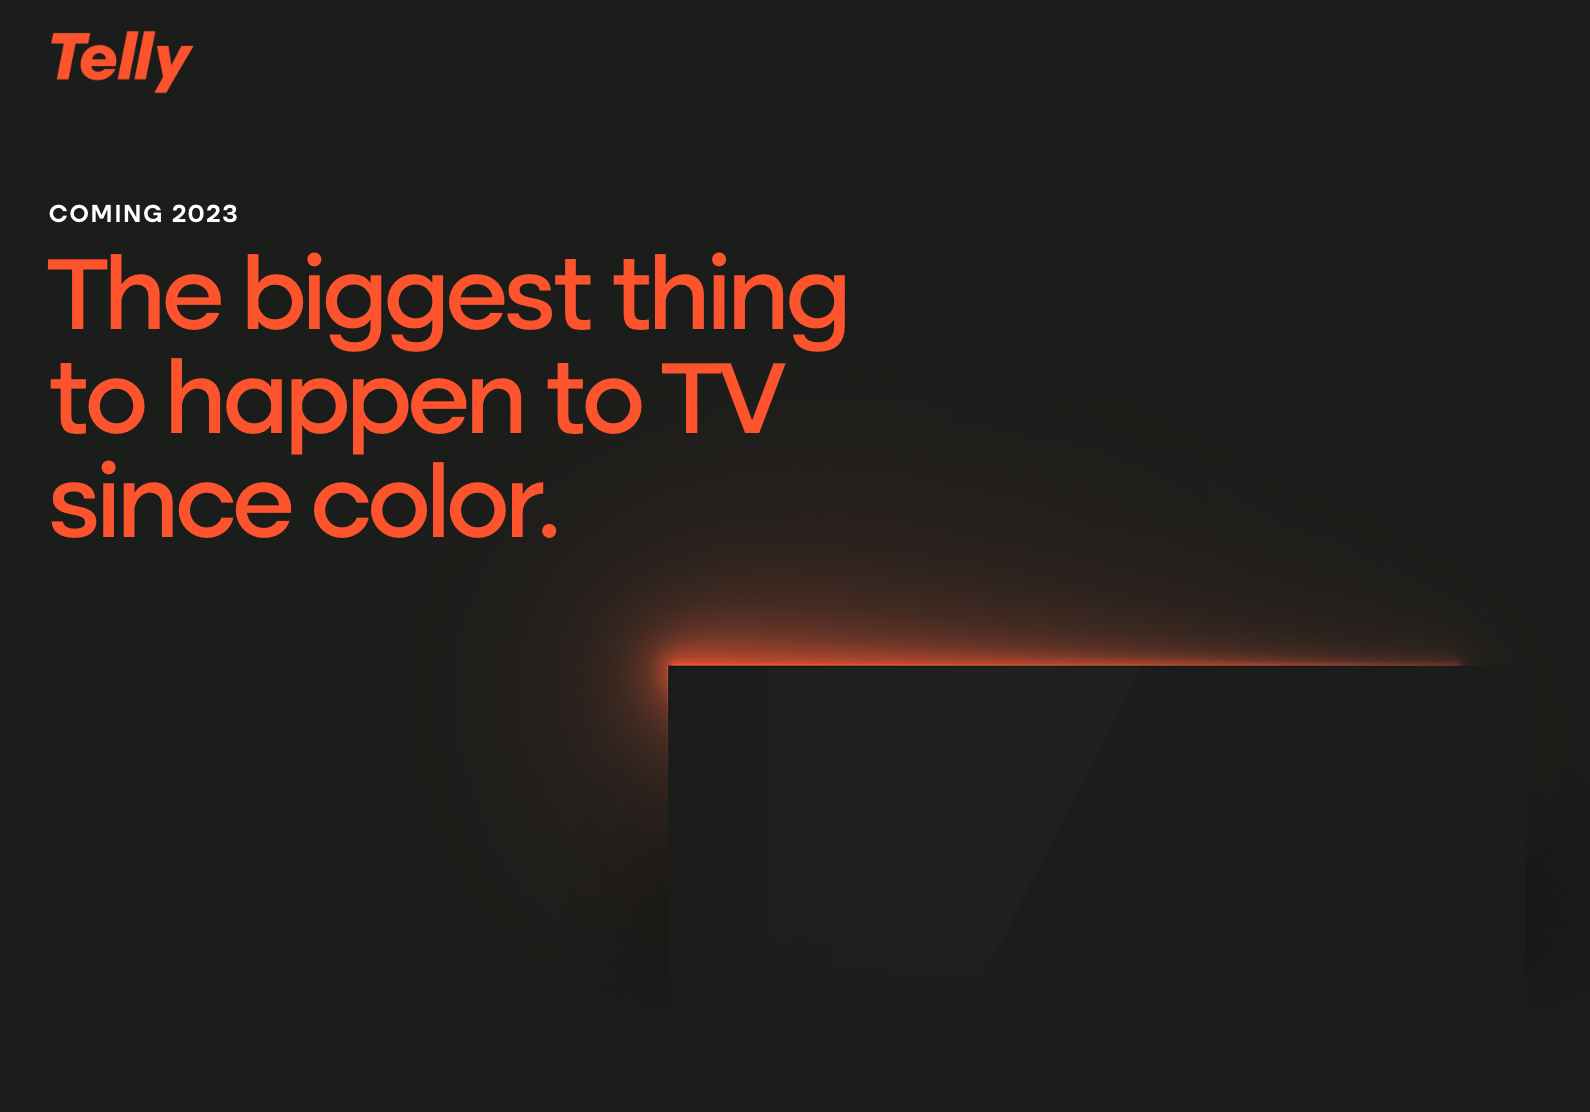 A teaser graphic letting people know the free TV Telly service is coming in 2023.